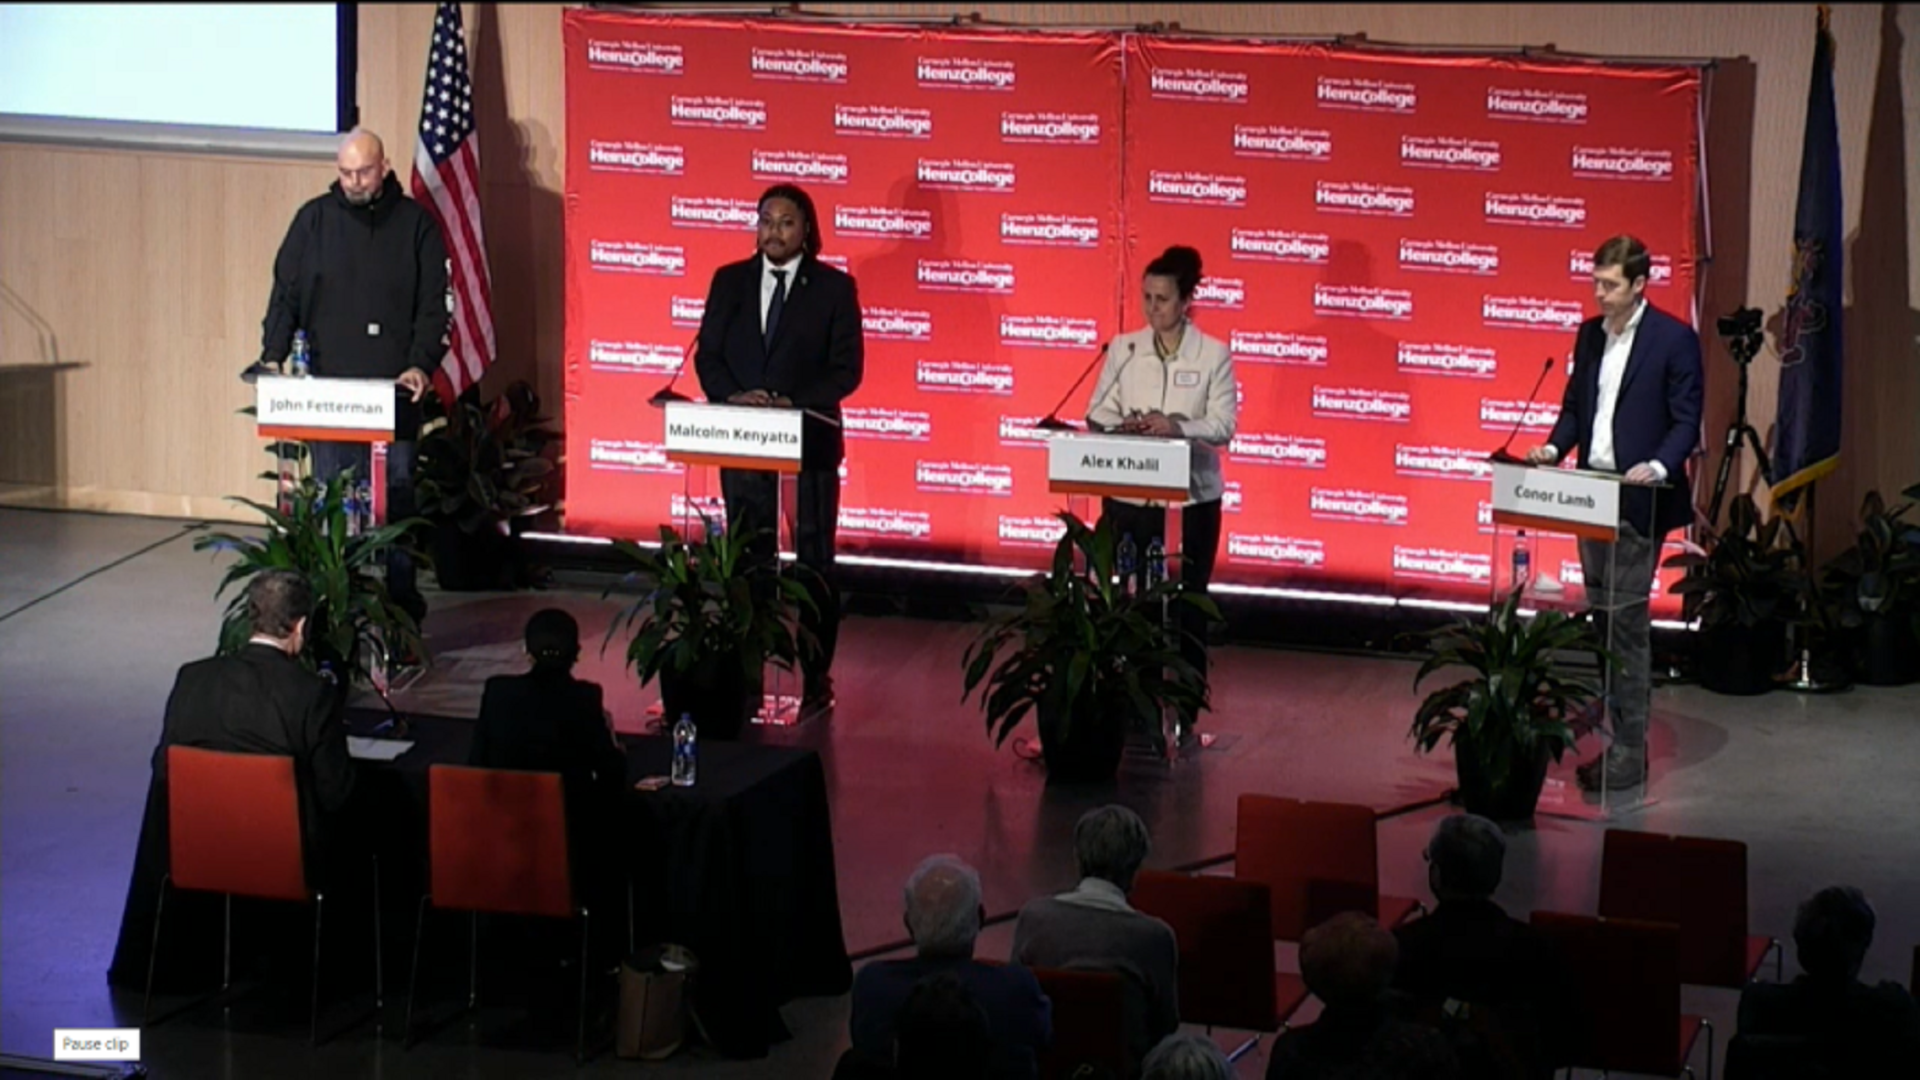 Four of the Democrats running for Pennsylvania's hotly contested Senate seat debated March 20, 2022 on the Carnegie Mellon University campus.